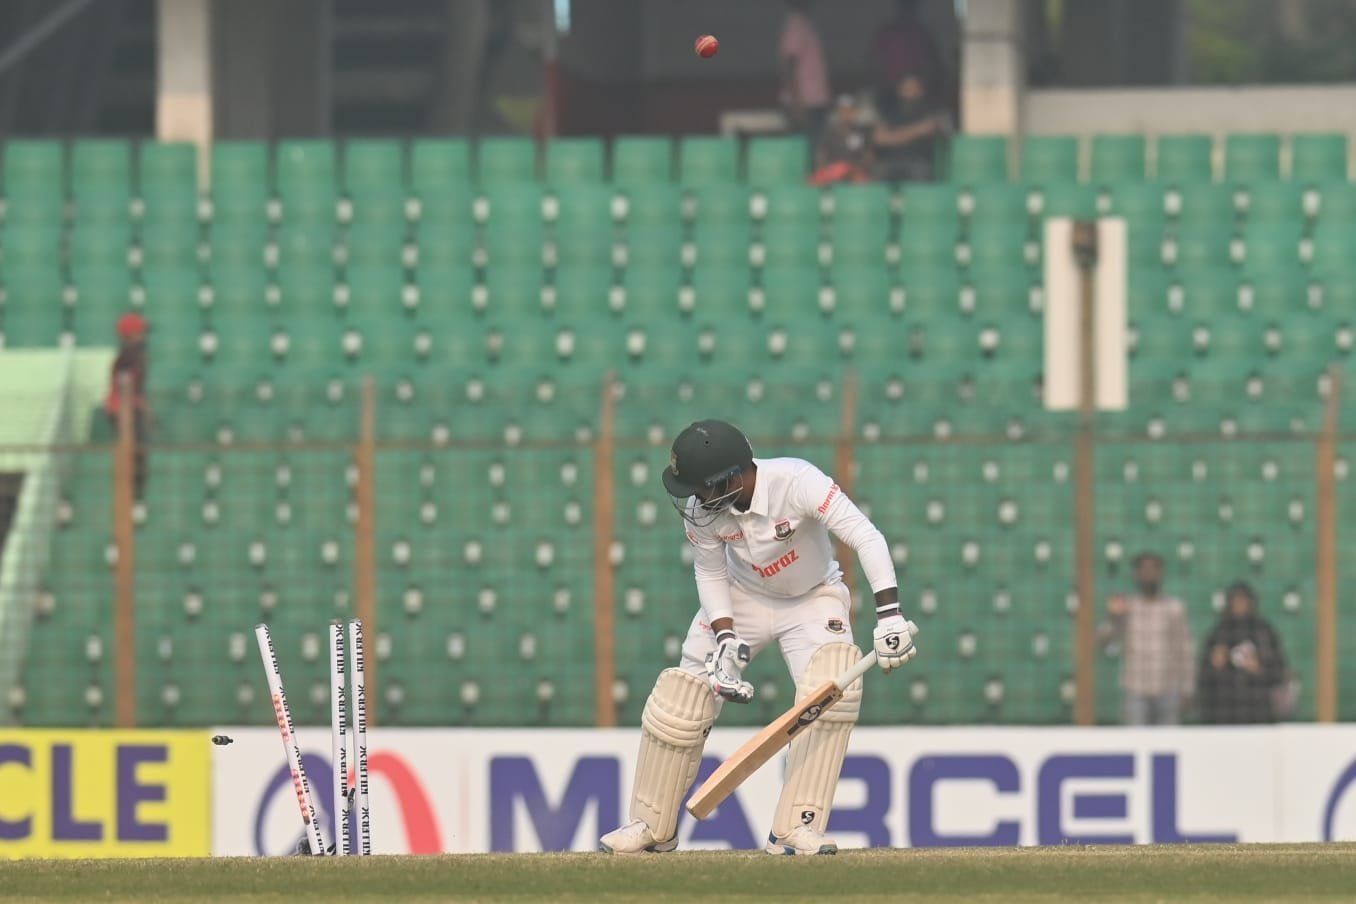 Bangladesh were bowled out for 150 in their first innings of the Chattogram Test. [P/C: Twitter]